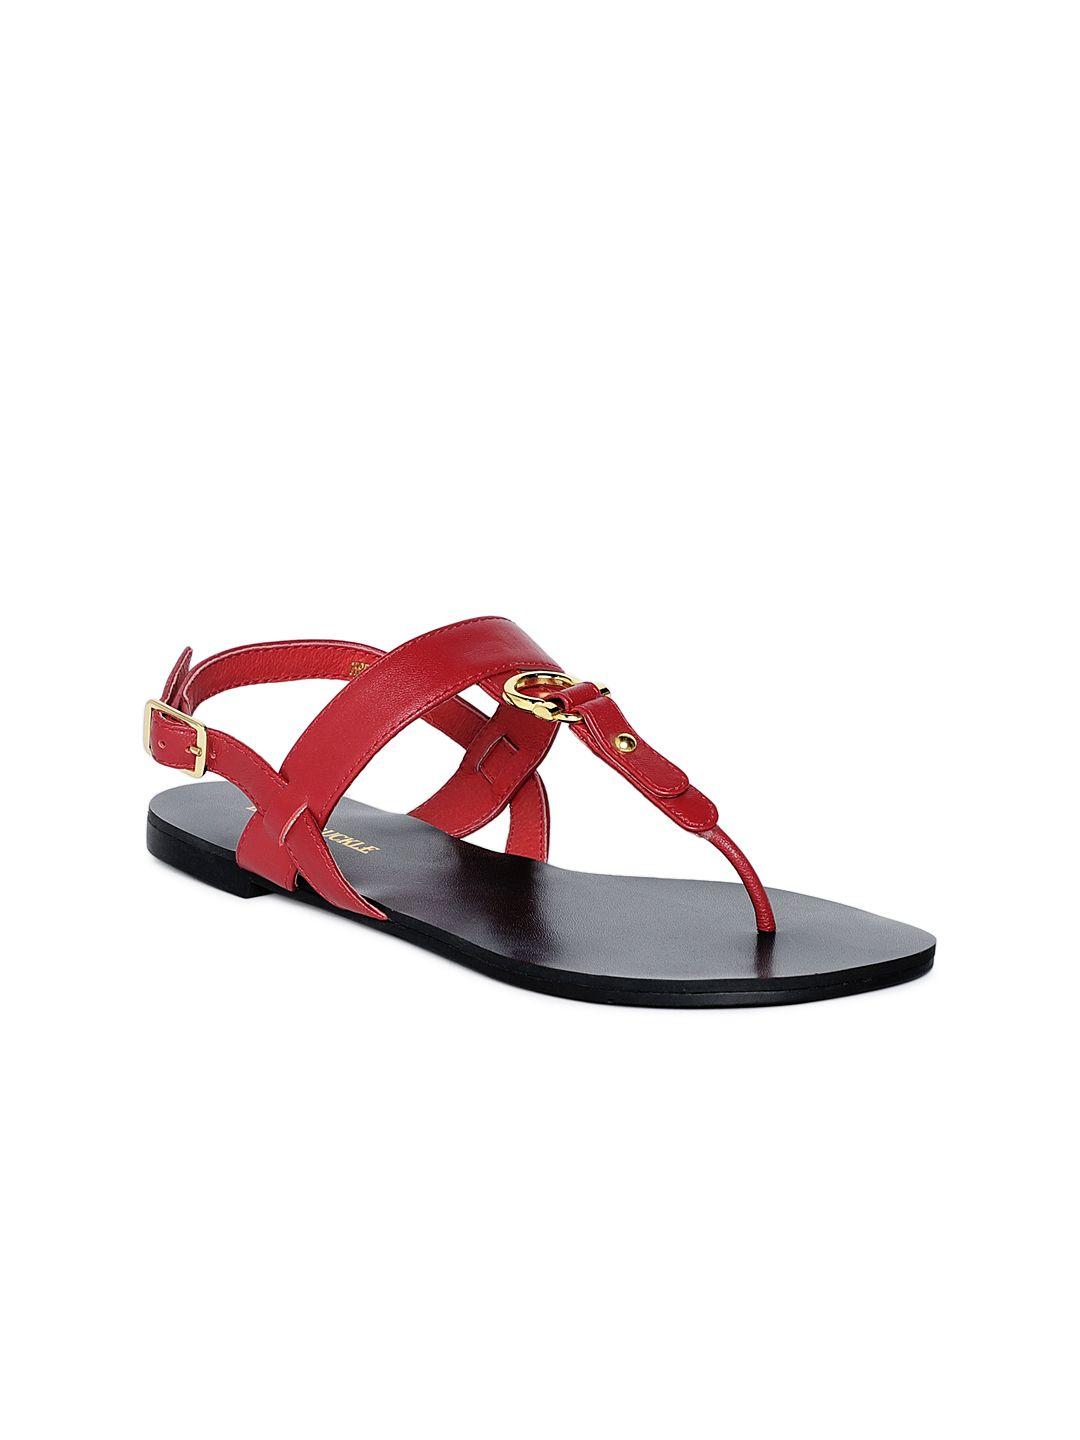 heel-&-buckle-london-women-red-solid-leather-t-strap-flats